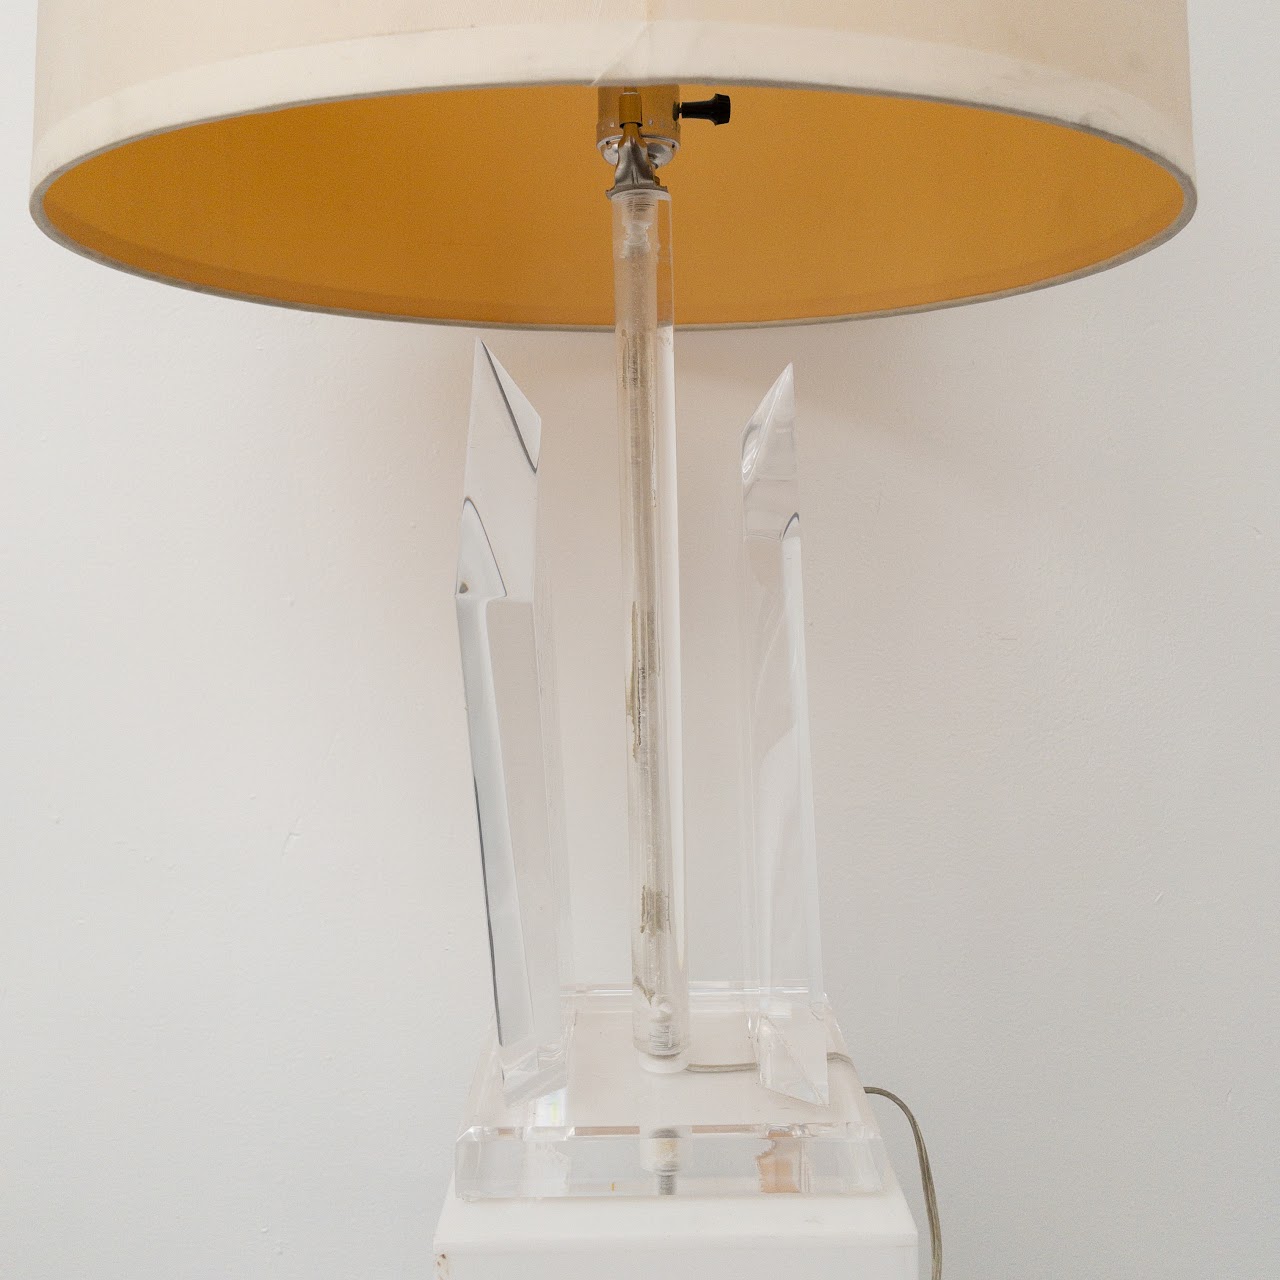 Van Teal Signed Mid-Century Modernist Lucite Table Lamp